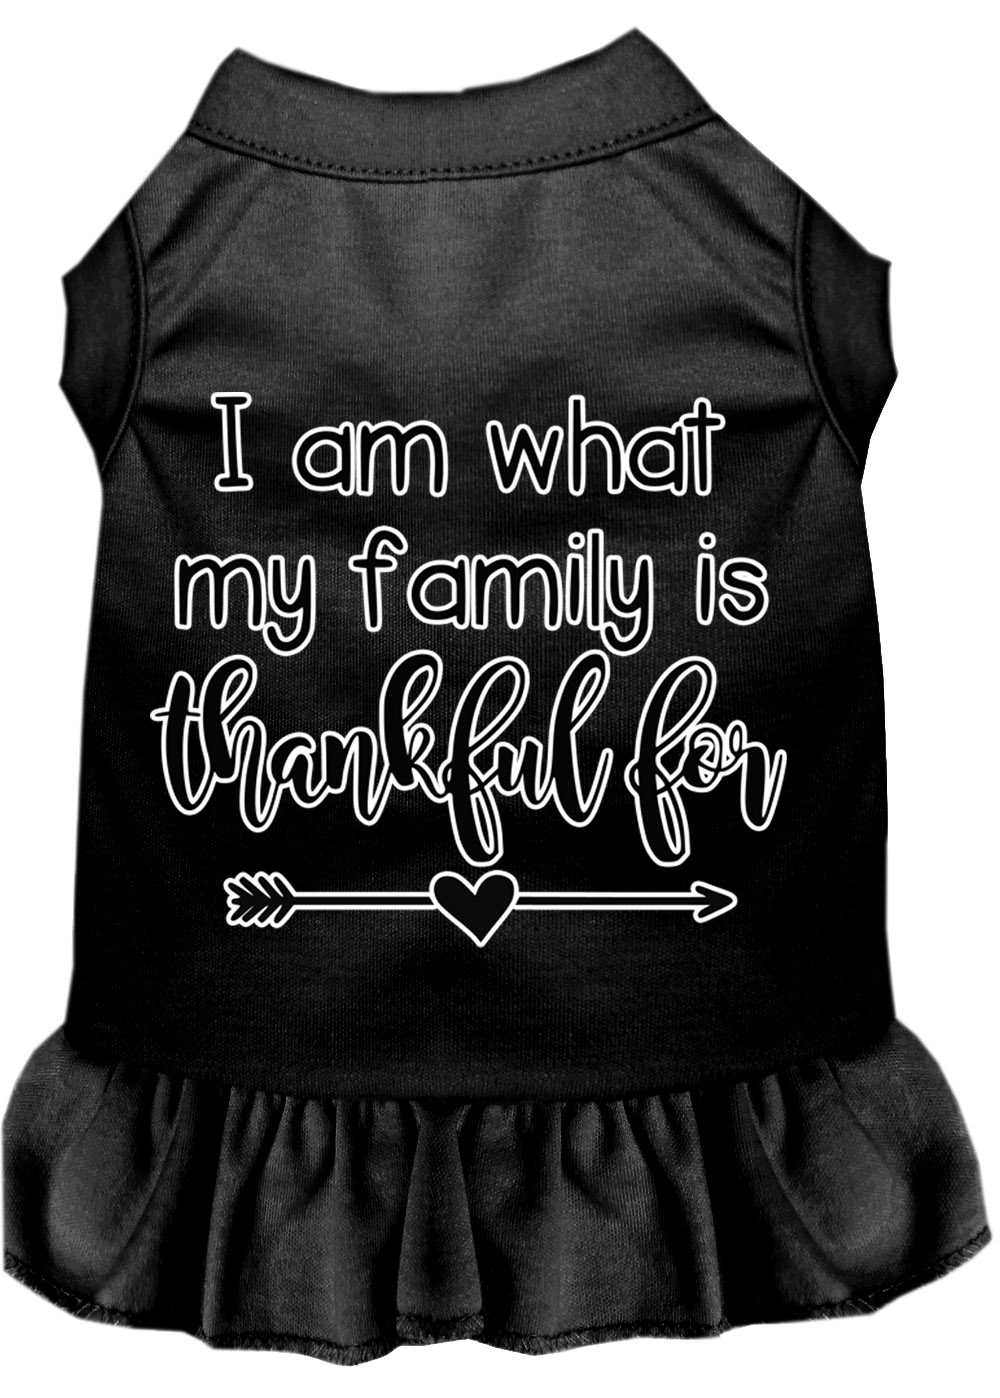 I Am What My Family is Thankful For Screen Print Dog Dress Black 4X